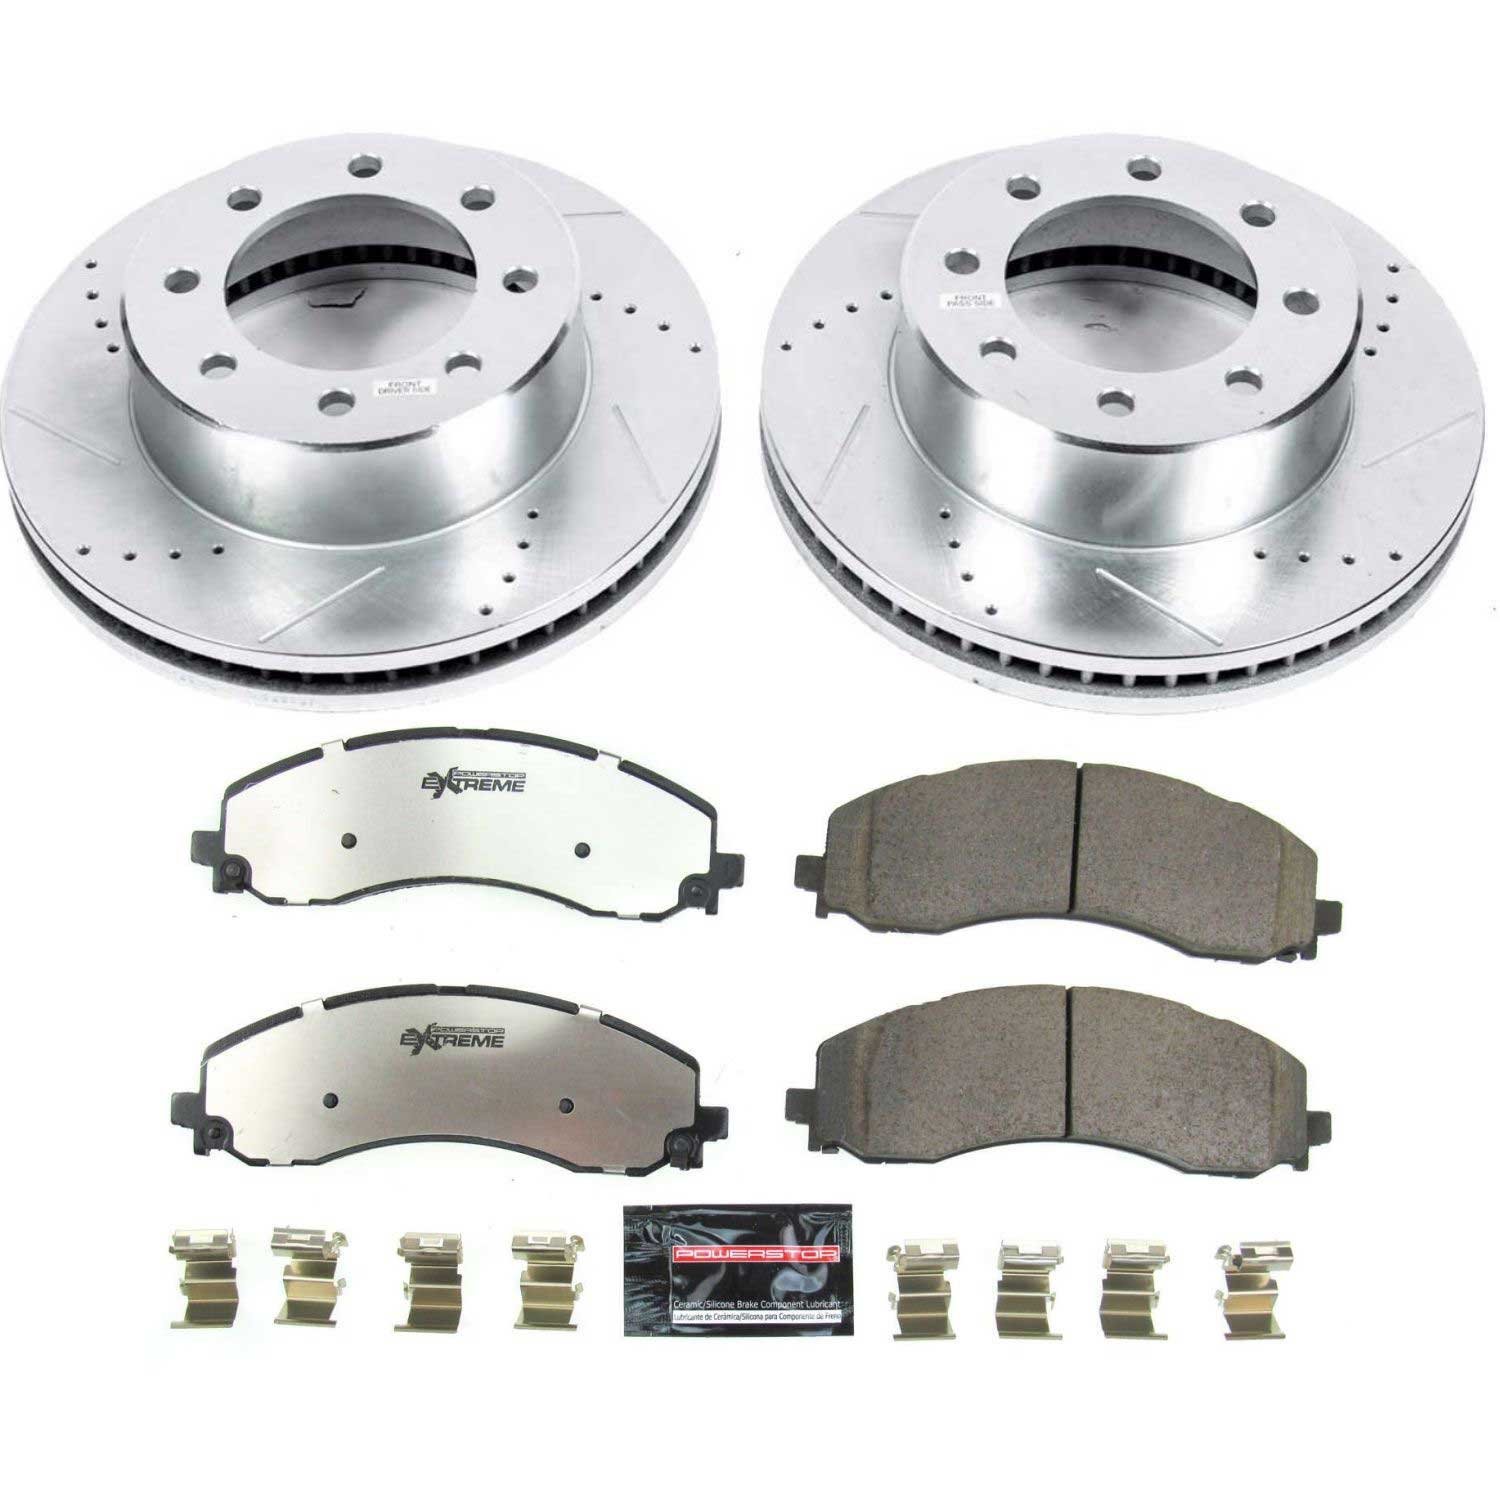 Z36 Truck and Towing Front Brake Pads & Rotor Kit Fits Select Late Model Ram Truck